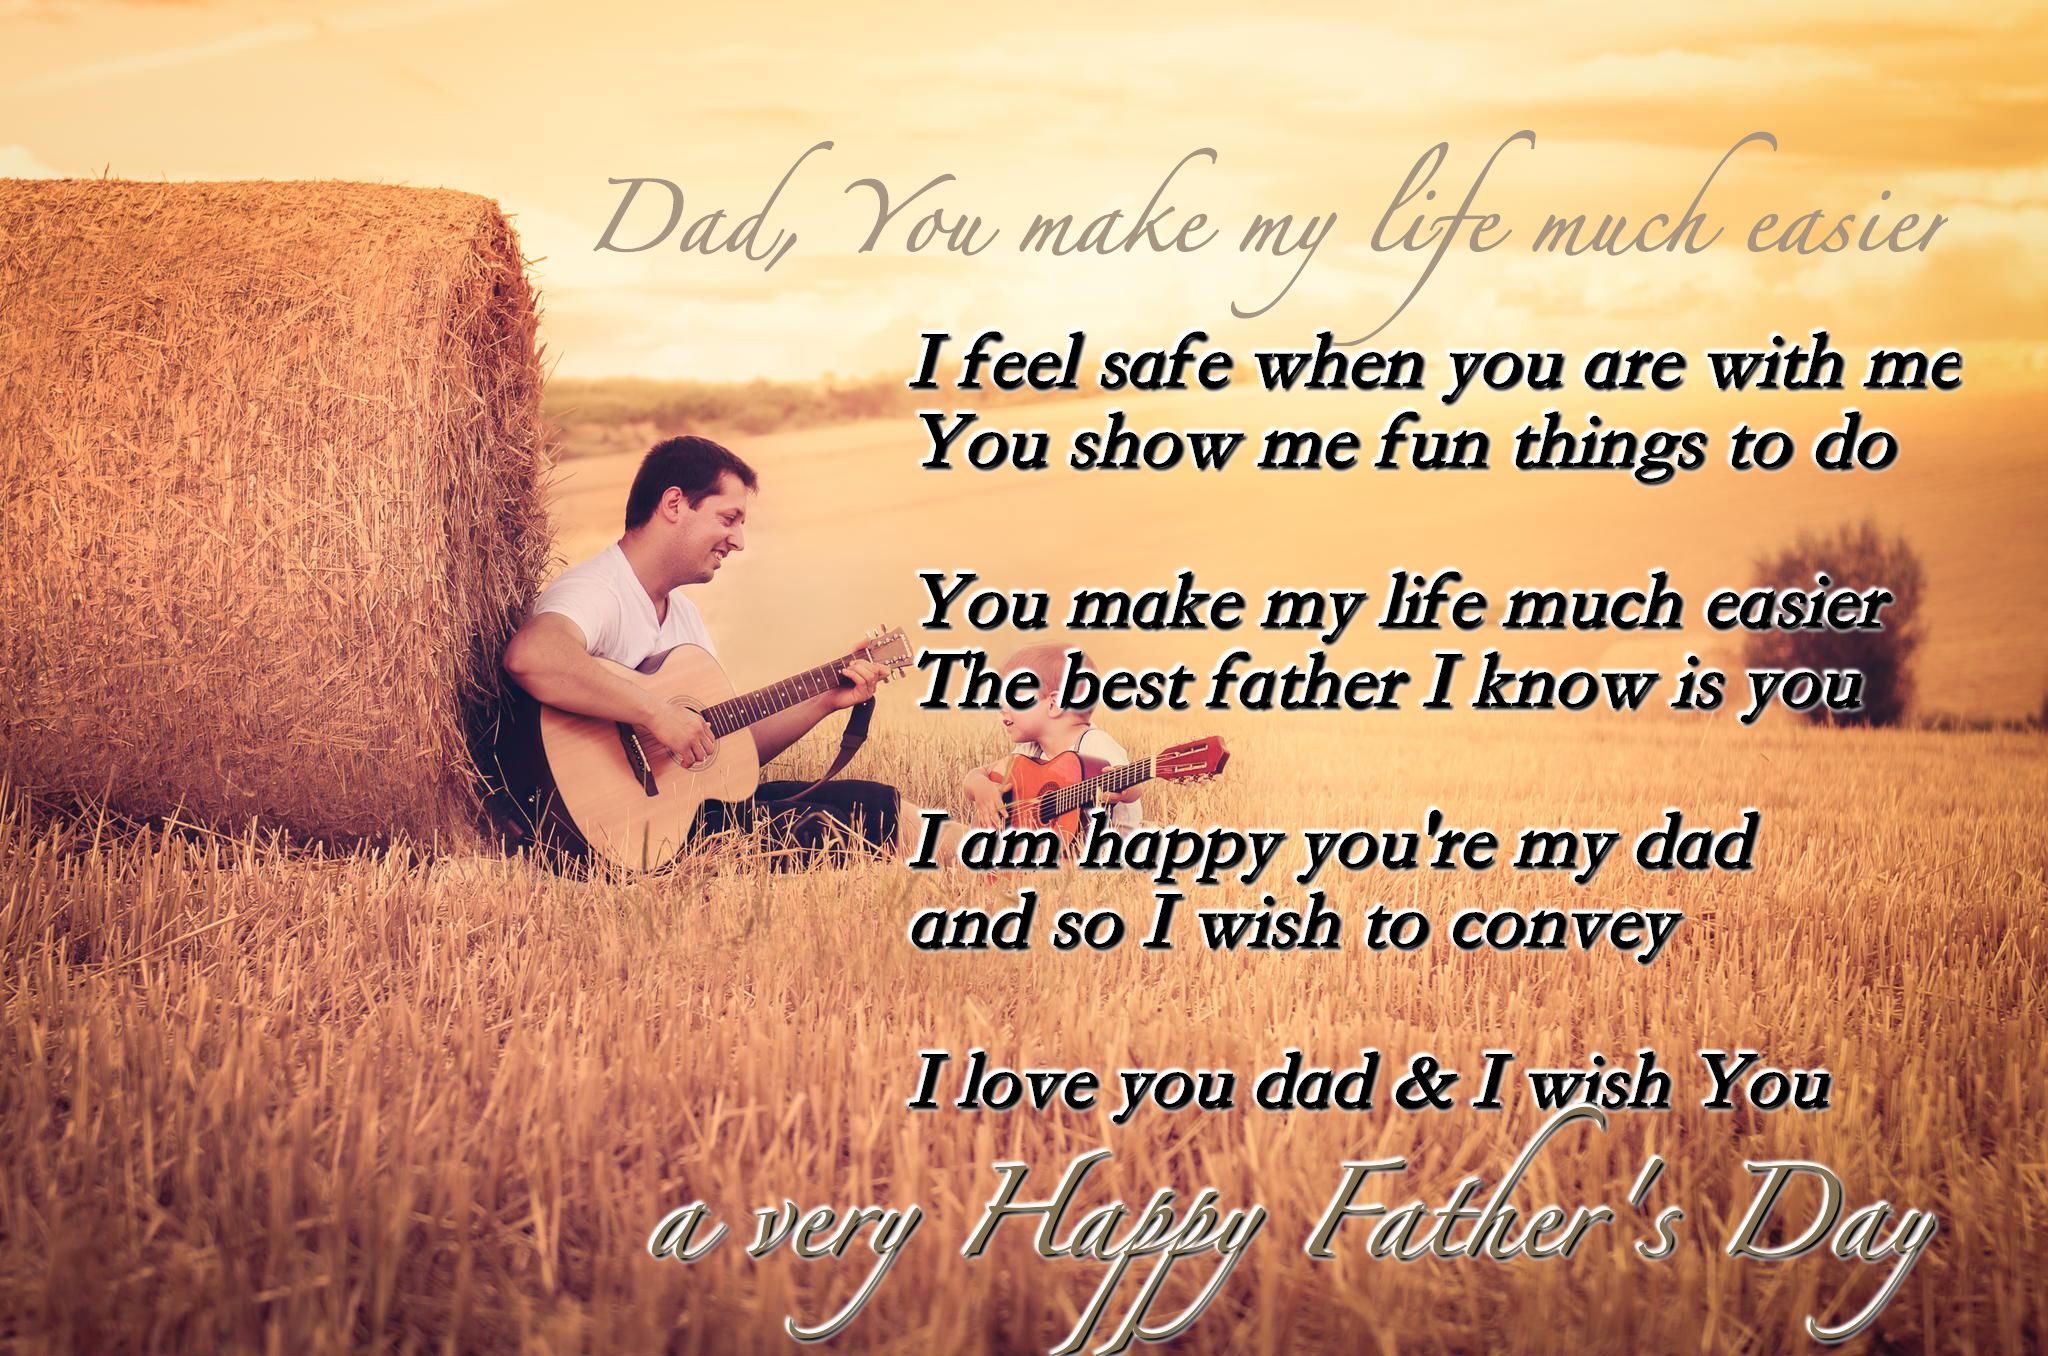 Happy Fathers Day Quotes From Daughtersto5animations.com